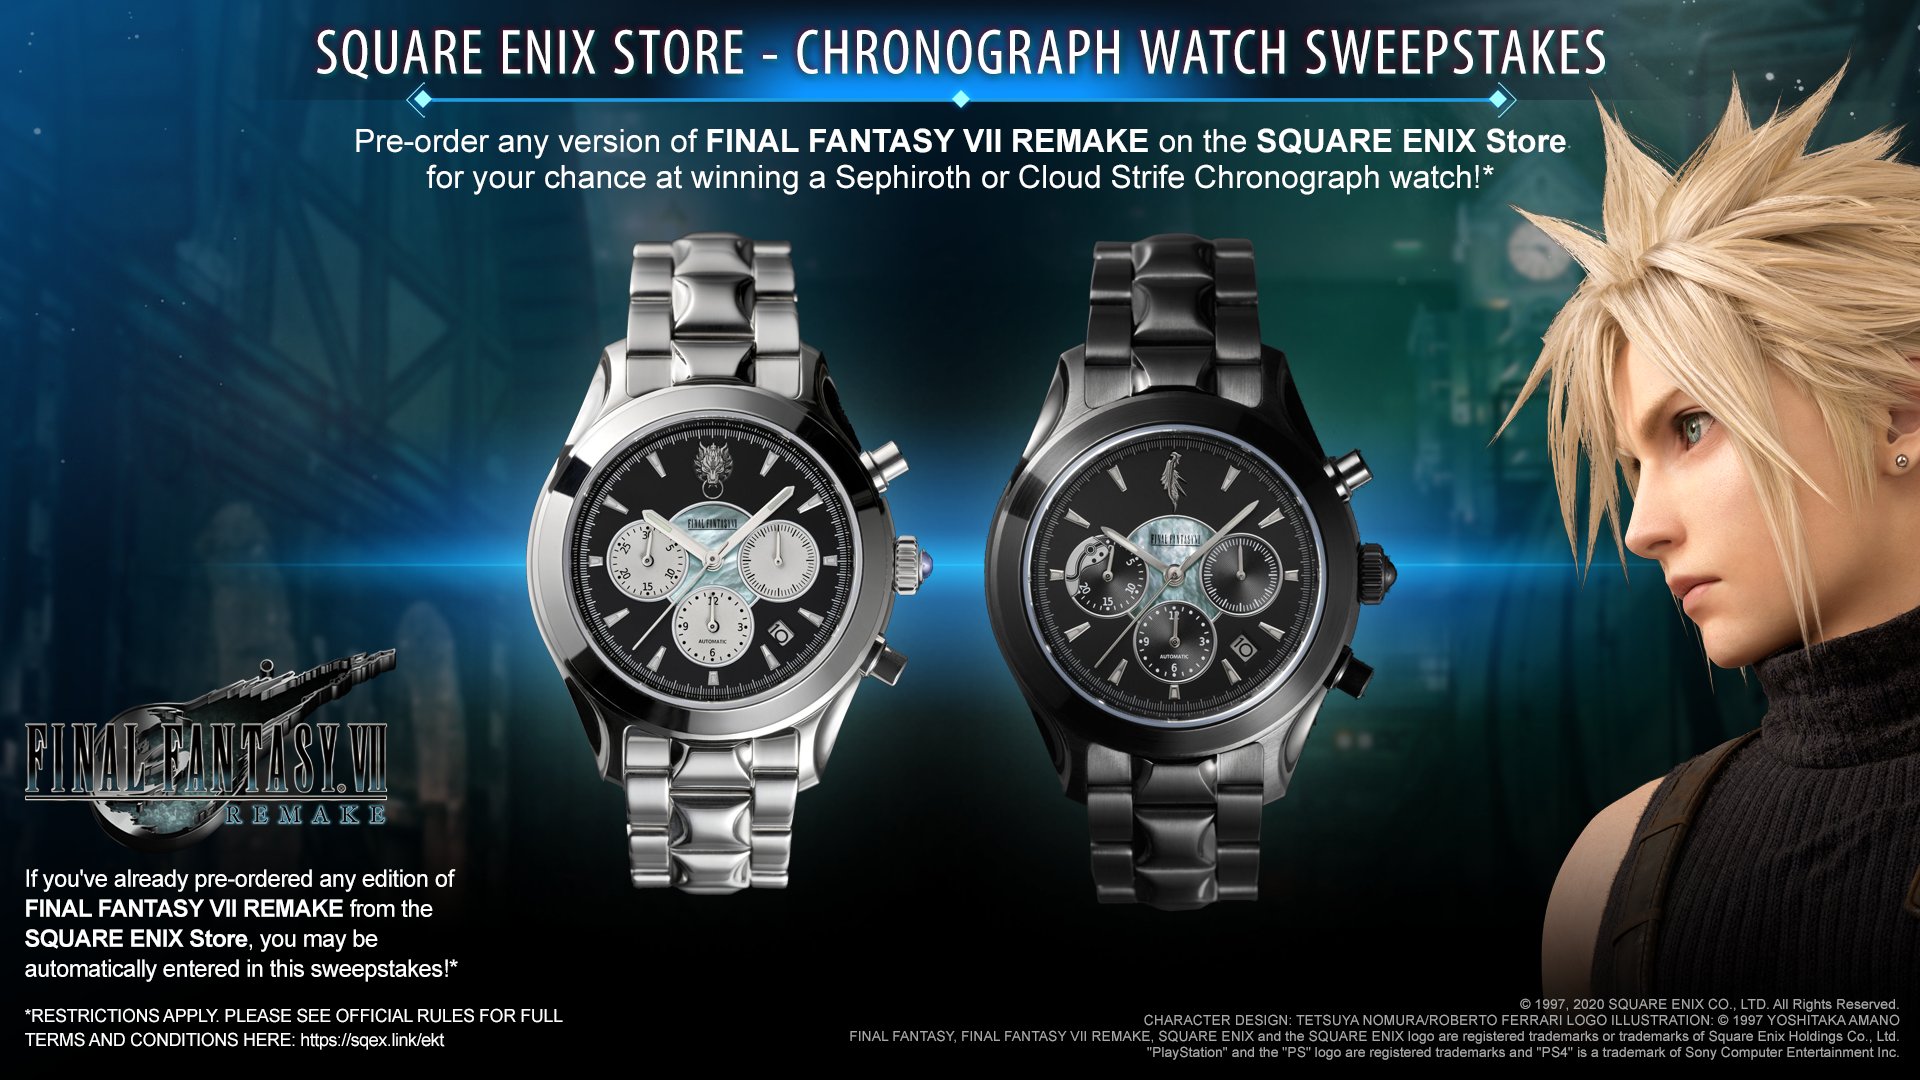 Pre-Ordering Final Fantasy VII Remake From Square Enix Enters Players Into A Contest To Win A Cloud Or Sephiroth Watch